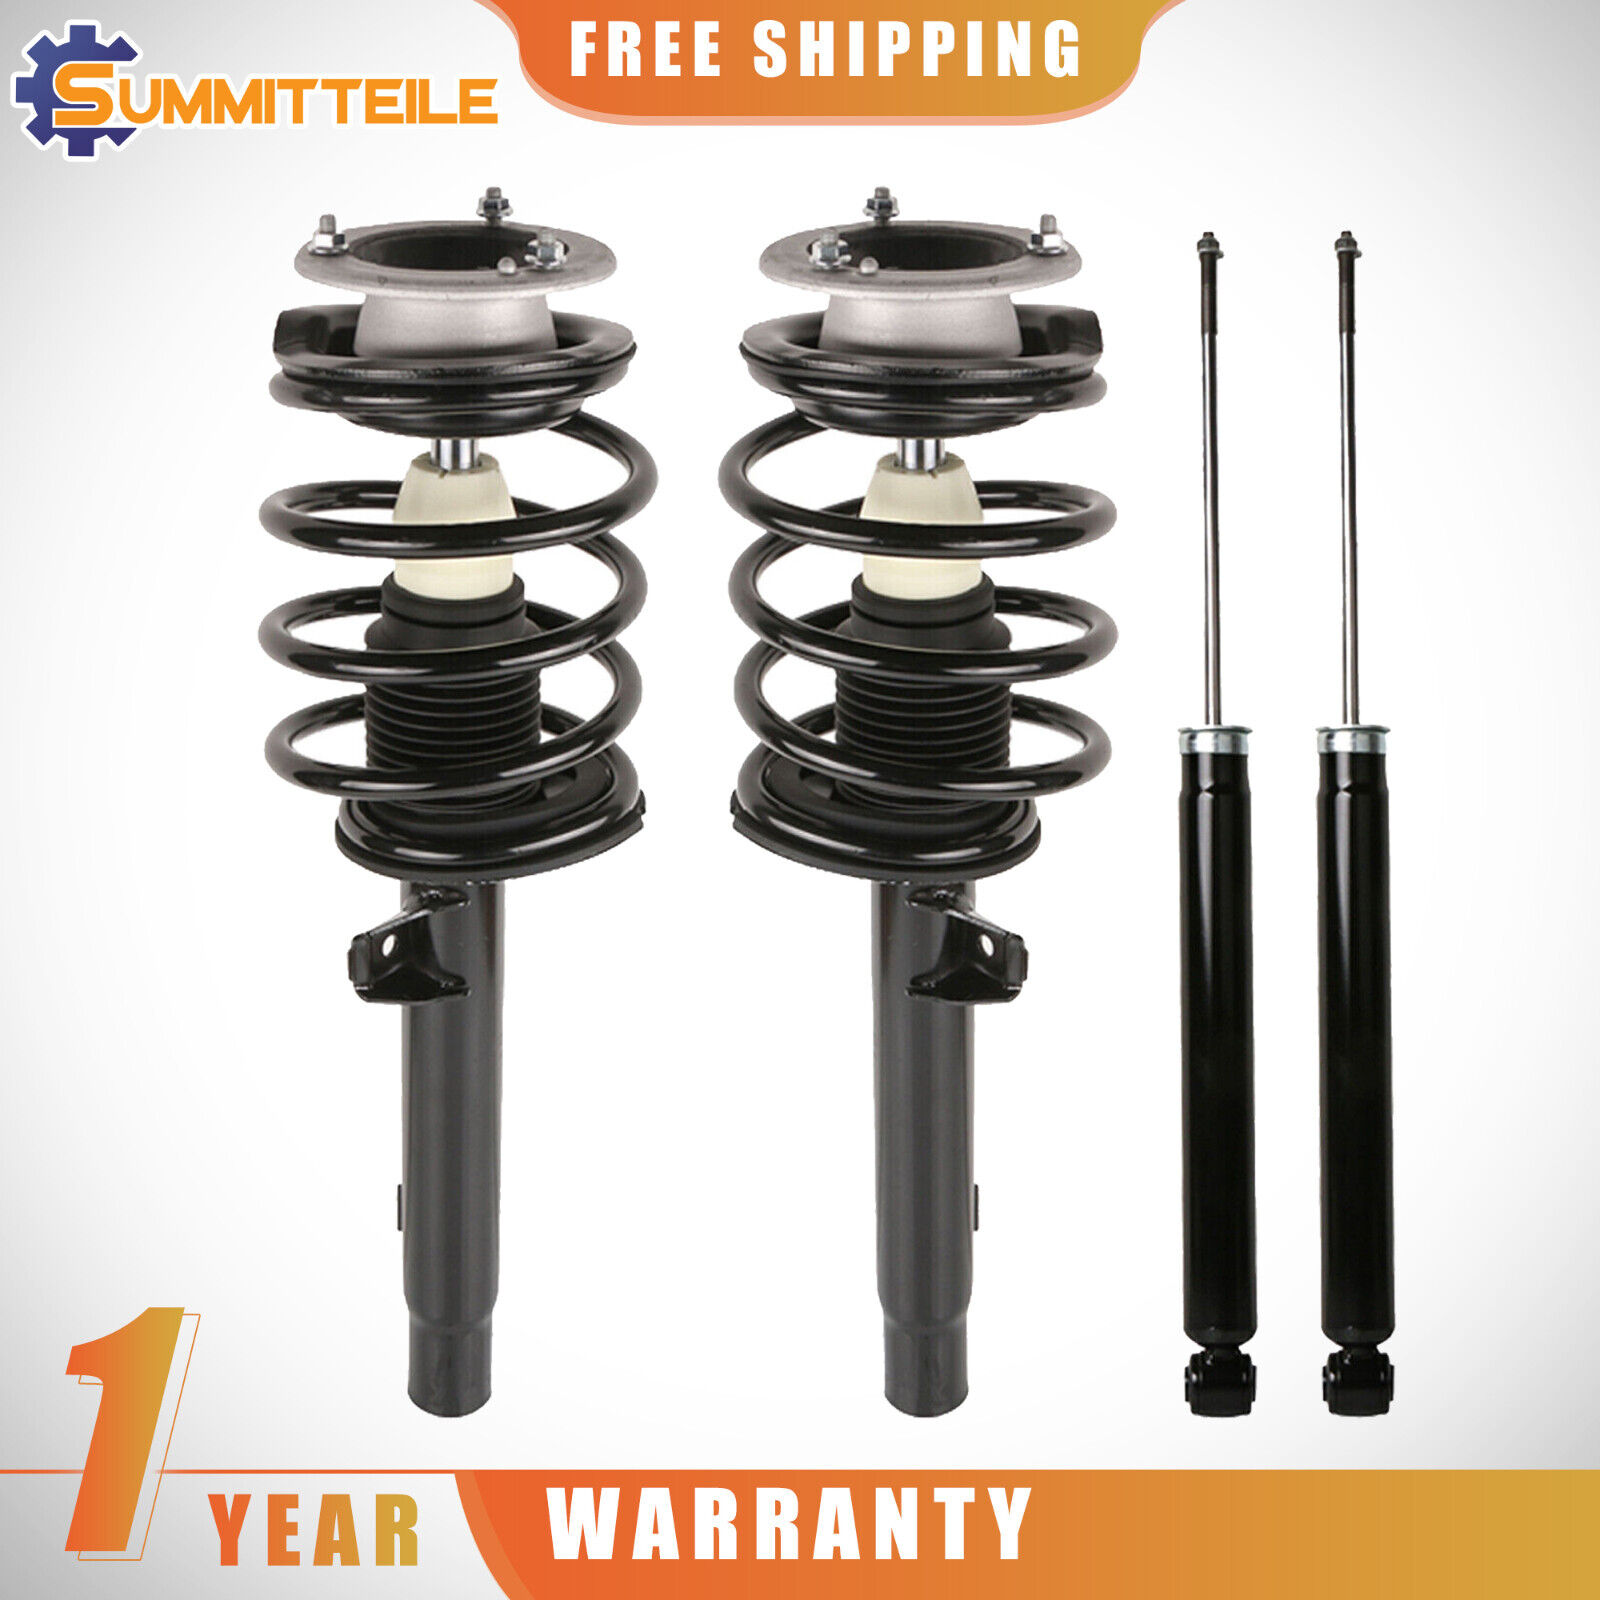 Front+Rear Complete Struts Shock Absorbers For BMW E46 323i 325Ci 328i 330i